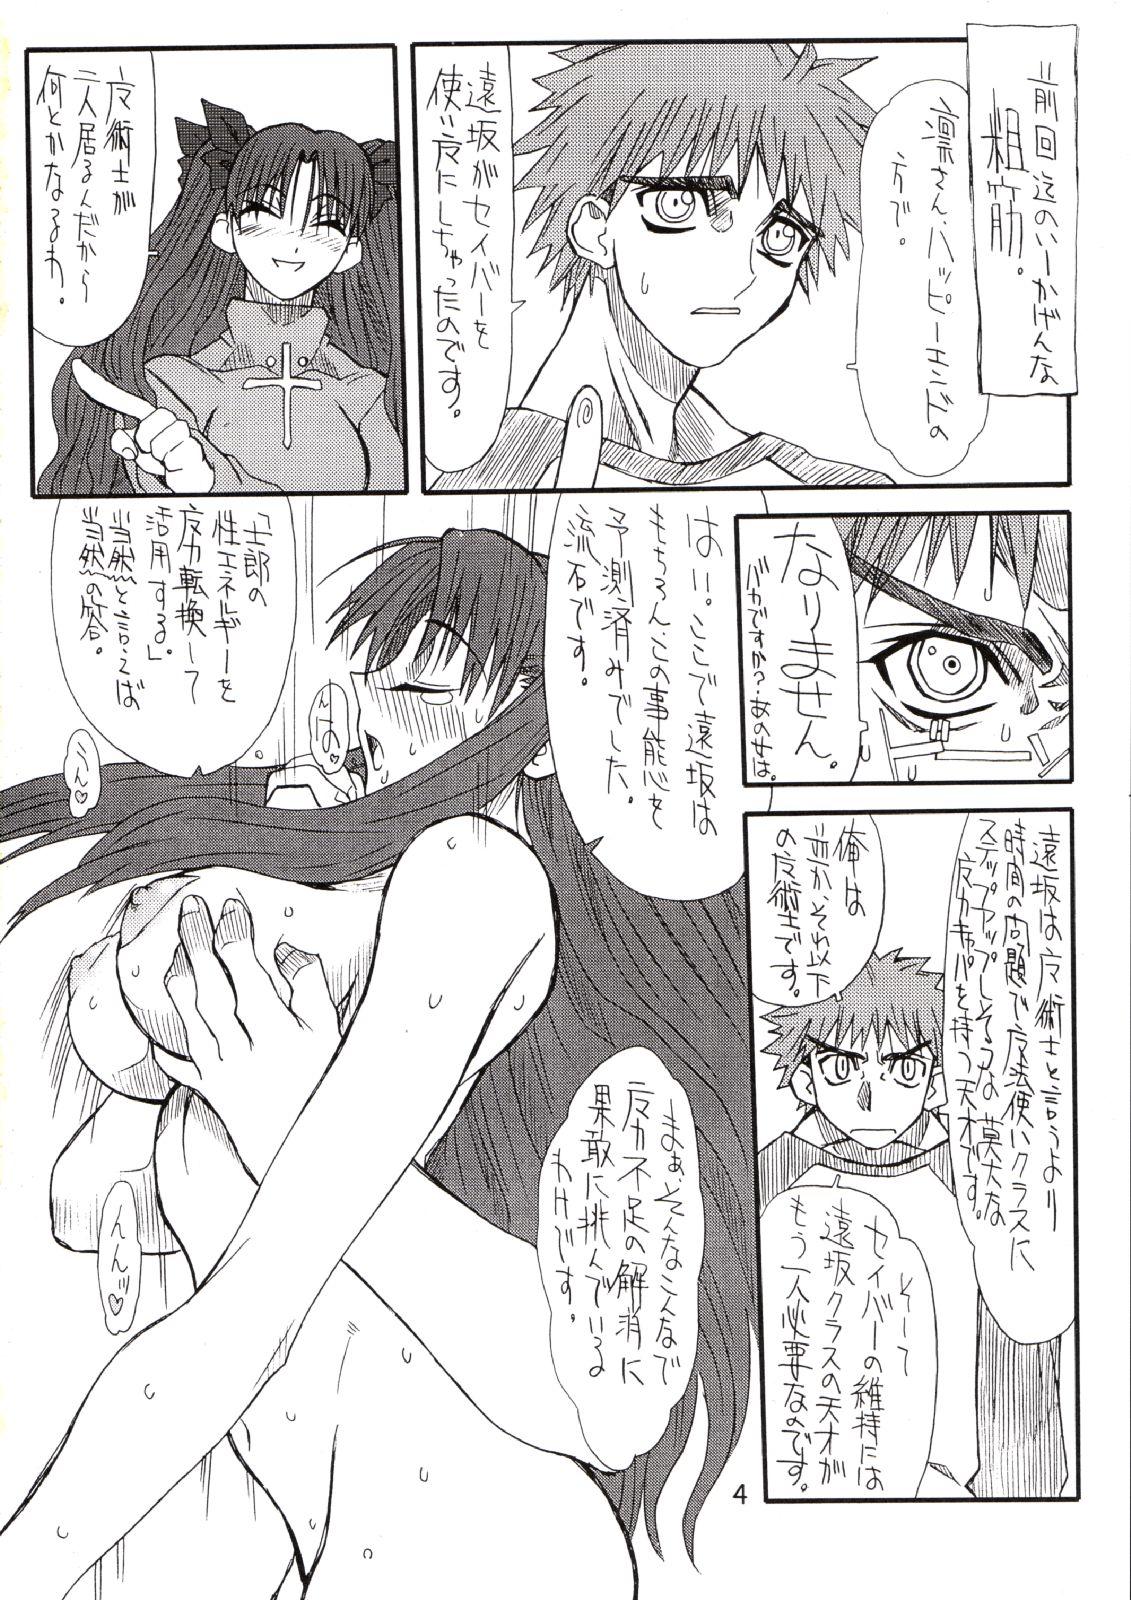 Exotic Corn 2 - Fate stay night Internal - Page 3